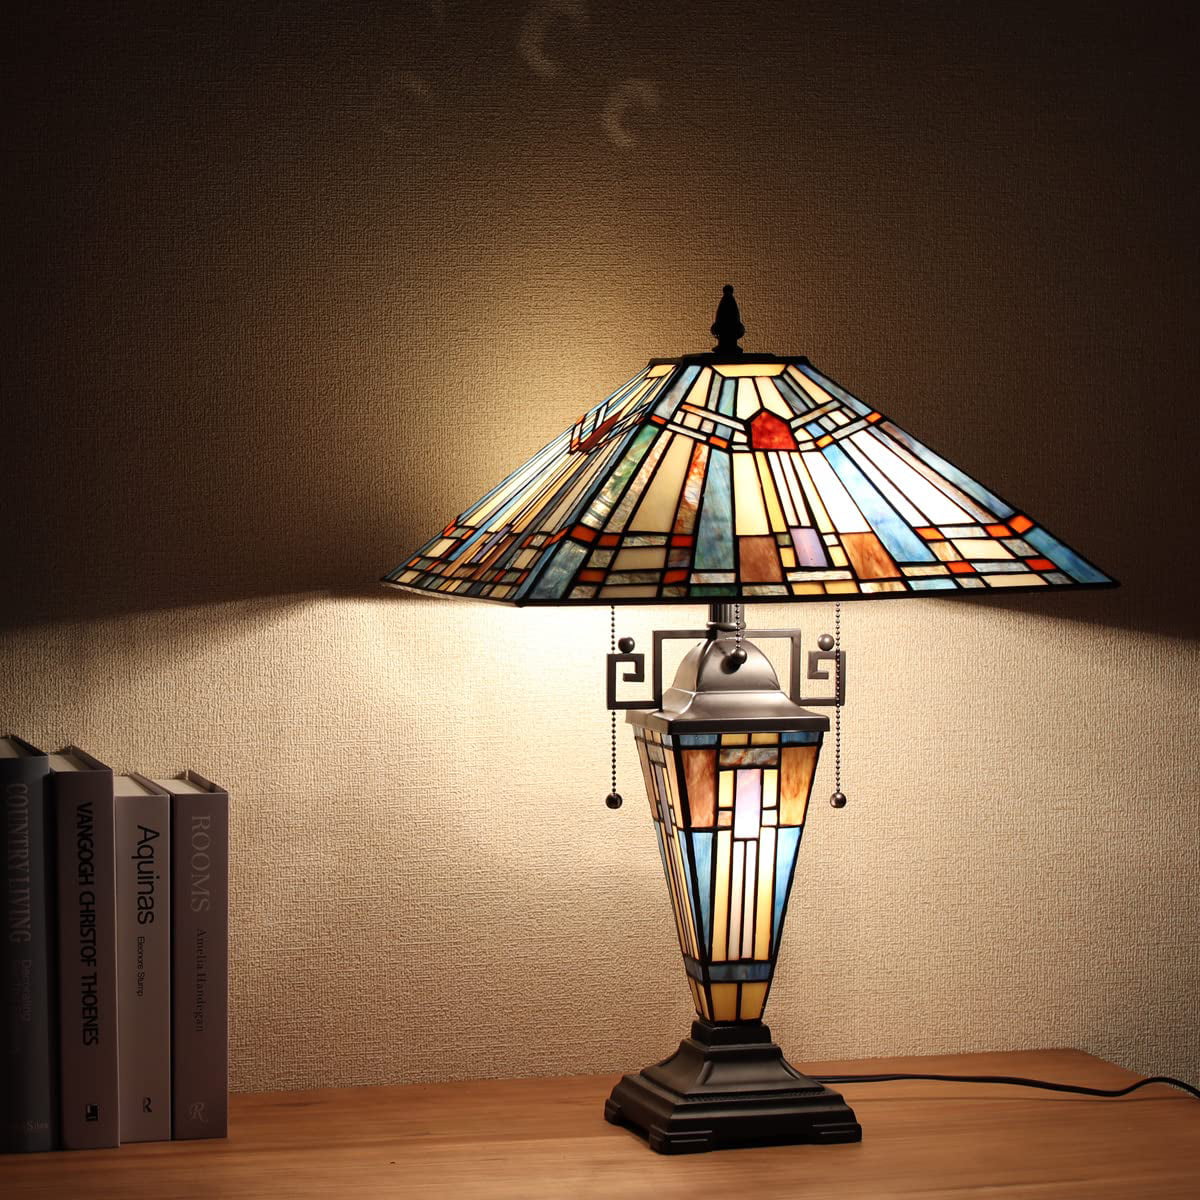 Vinplus  Table Lamp Night Light 16" Wide Handmade Stained Glass Lamp Shade 3 Light Blue Mission Style Vintage Table Lamp